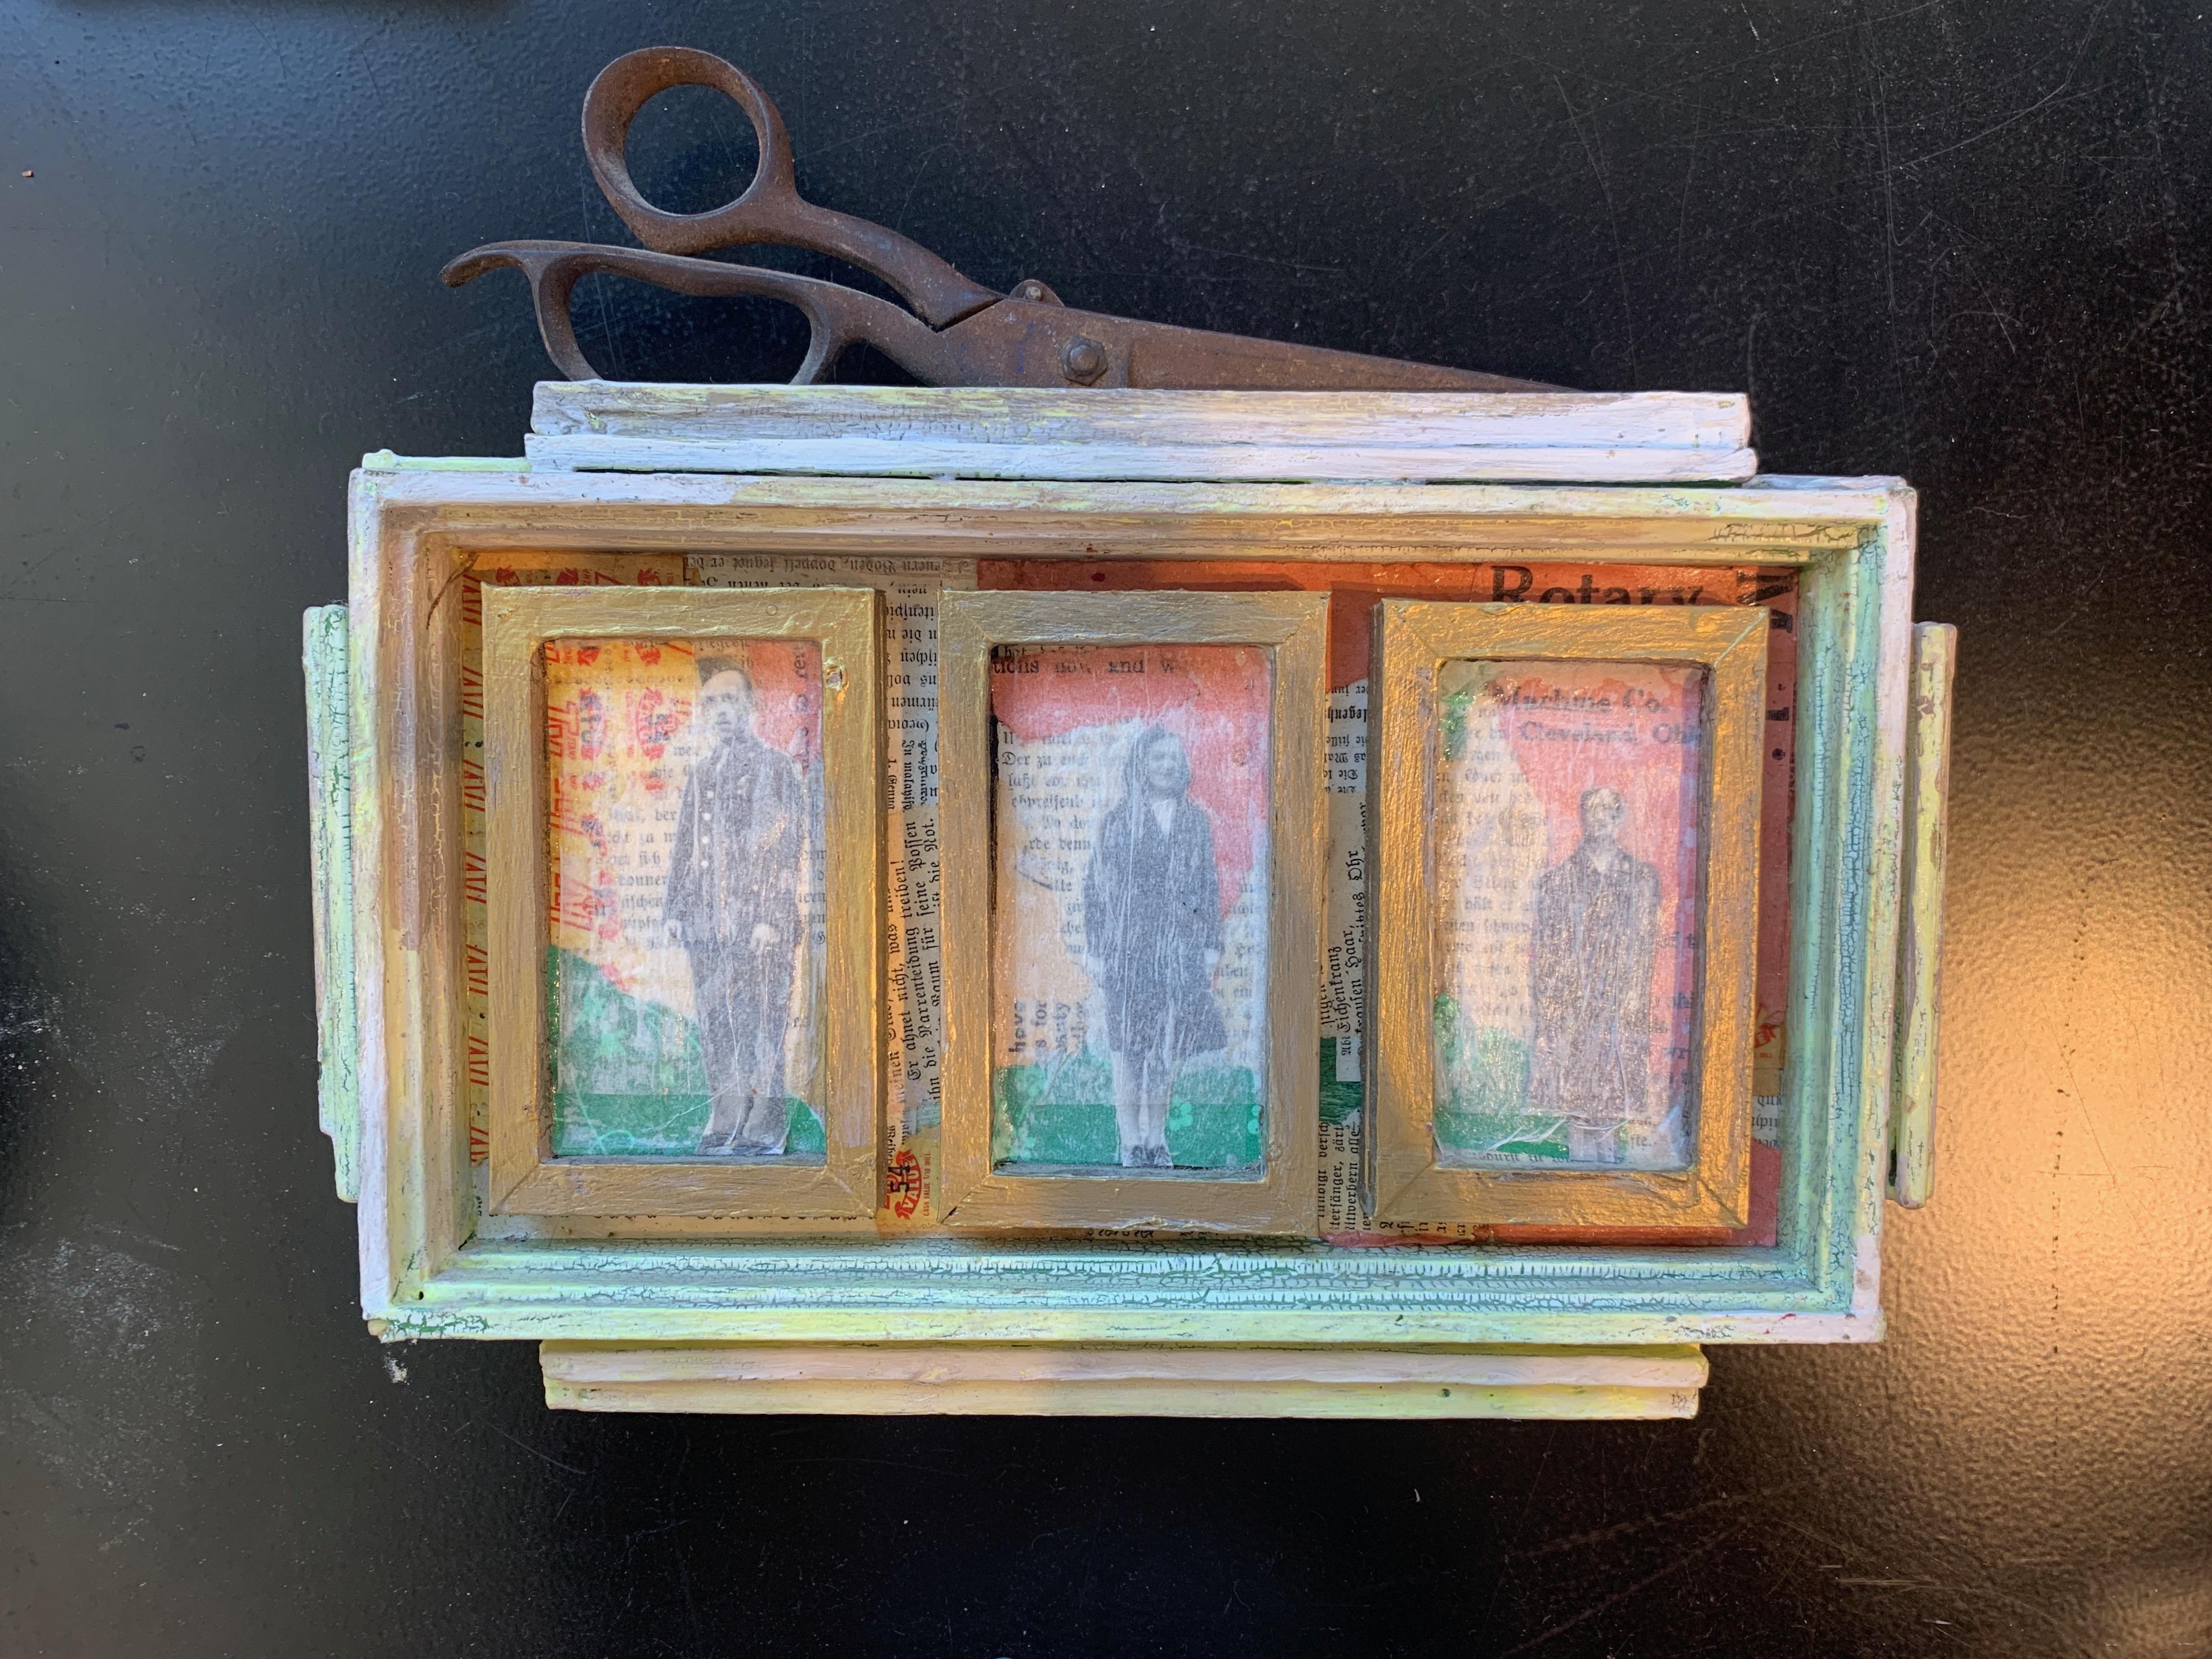 Mixed media assemblage

Double sided